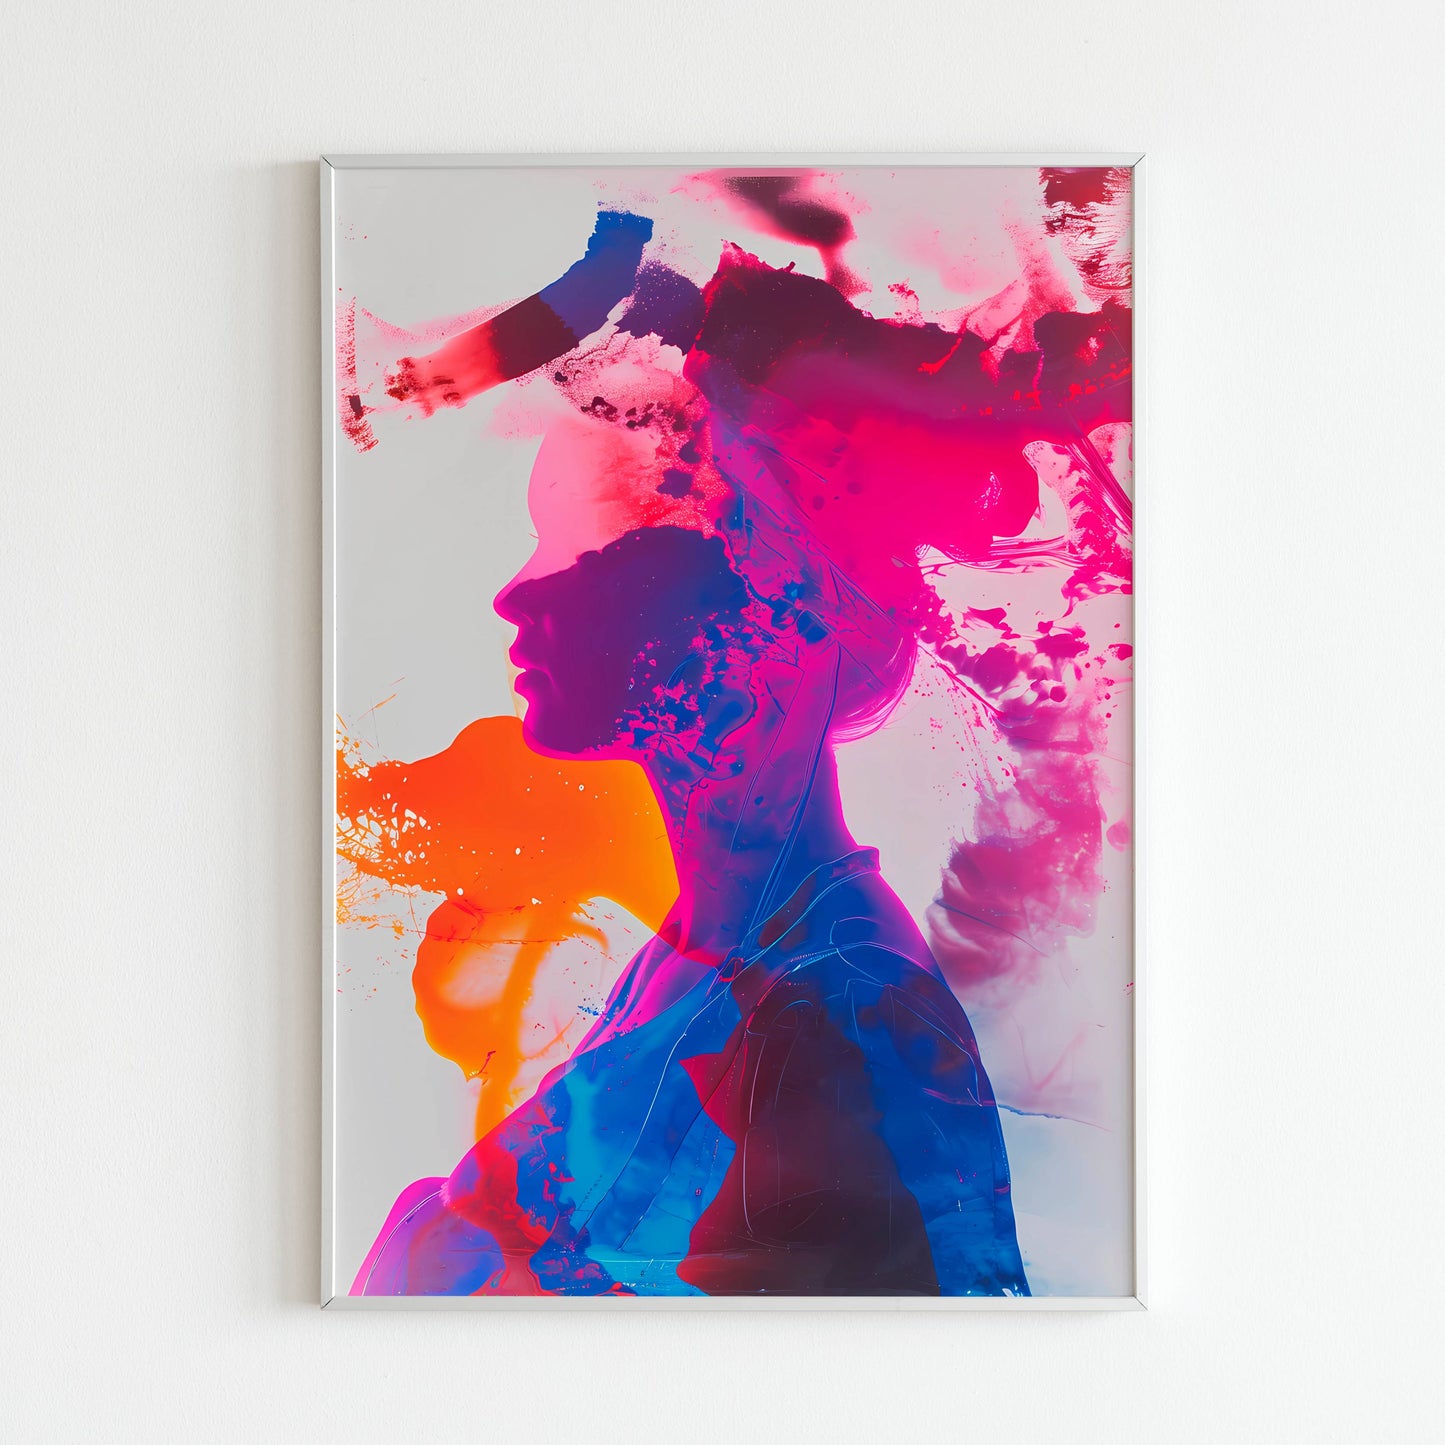 Woman Fluroscent Art - Printed Wall Art / Poster. This captivating poster depicts a woman using fluorescent colors in a unique and eye-catching style. Arrives ready to hang.